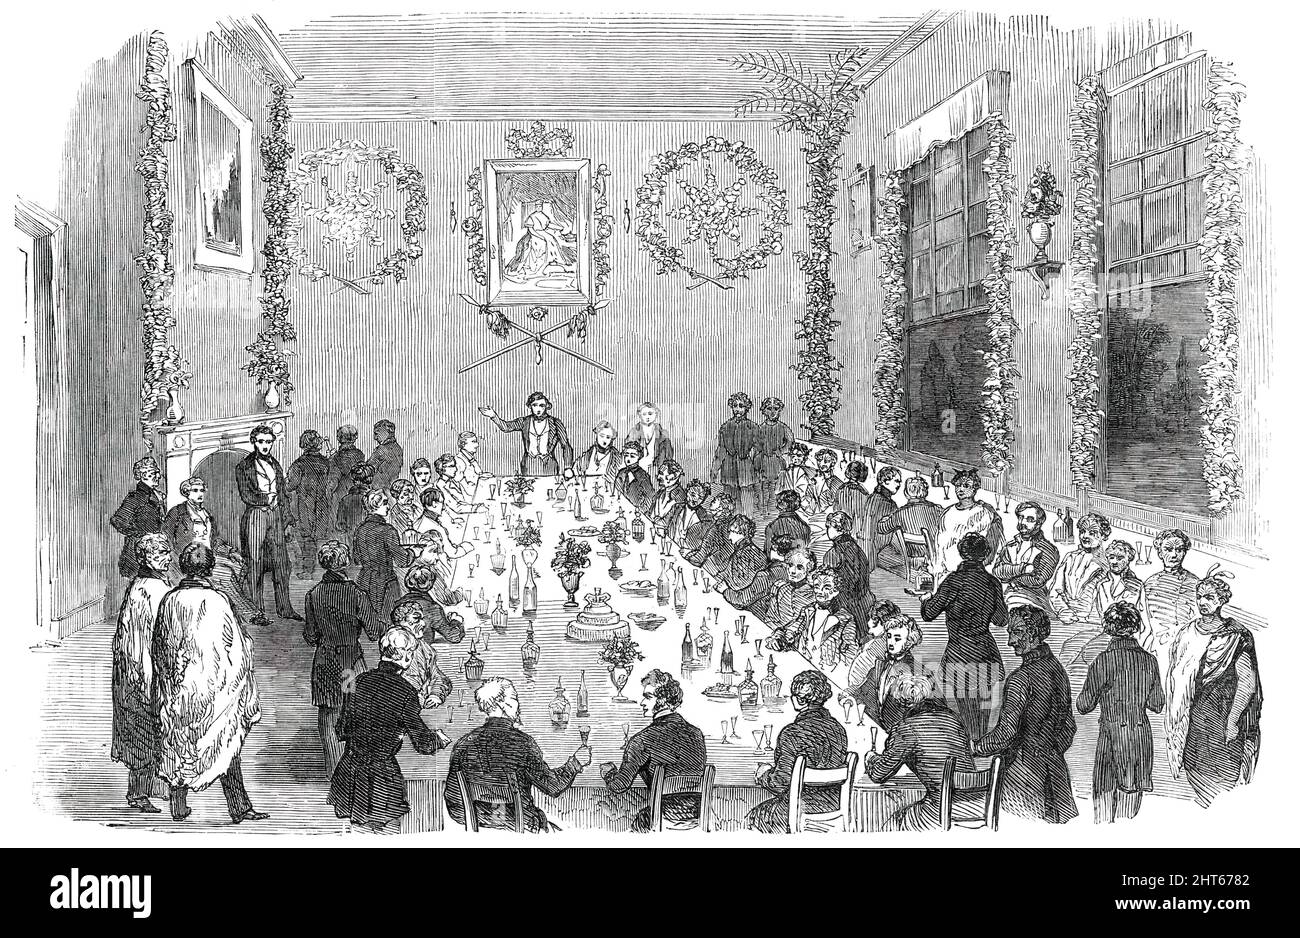 Banquet given at Wellington to Native Chiefs of New Zealand, 1850. '...an Entertainment lately given...by Dr. Fitzgerald...on the occasion of having received from Earl Grey a portrait of her Majesty Queen Victoria...At the head of the apartment, over the chair, was the portrait of her Majesty...Underneath were two splendid native war spears, forming...a triangle, from the apex of which a magnificent &quot;mere pounamia,&quot; or greenstone club, was suspended; these, being emblems of New Zealand chieftainship, were intended to represent the cession of sovereignty to her Majesty the Queen. On e Stock Photo